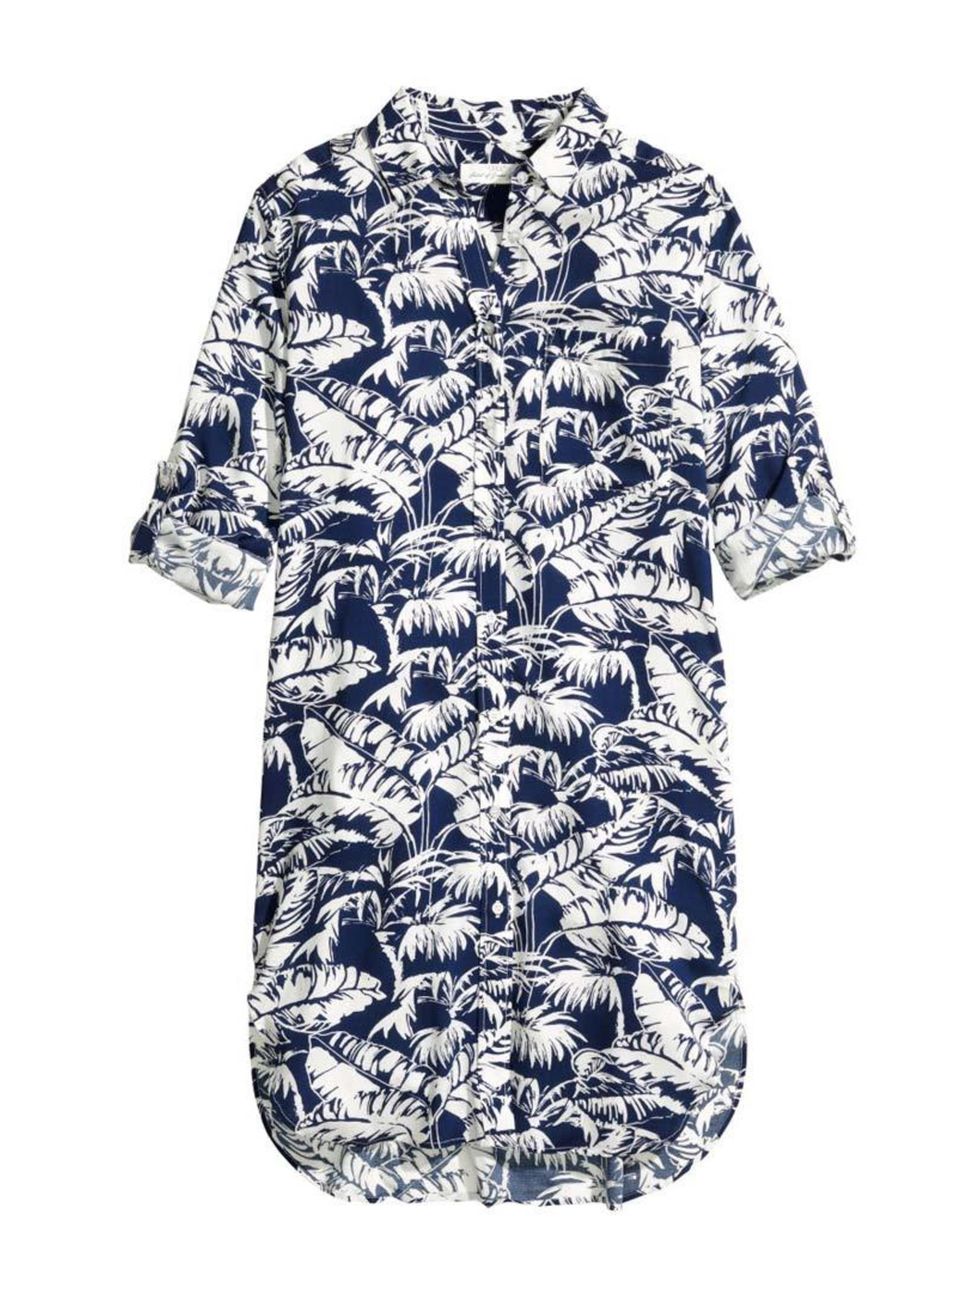 <p>This simple shirt-dress also doubles as the perfect beach cover-up.</p>

<p><a href="http://www.hm.com/gb/product/88967?article=88967-C" target="_blank">H&M</a> shirt-dress, £24.99</p>

<p><a href="http://www.elleuk.com/promotion/twenty-percent-discoun